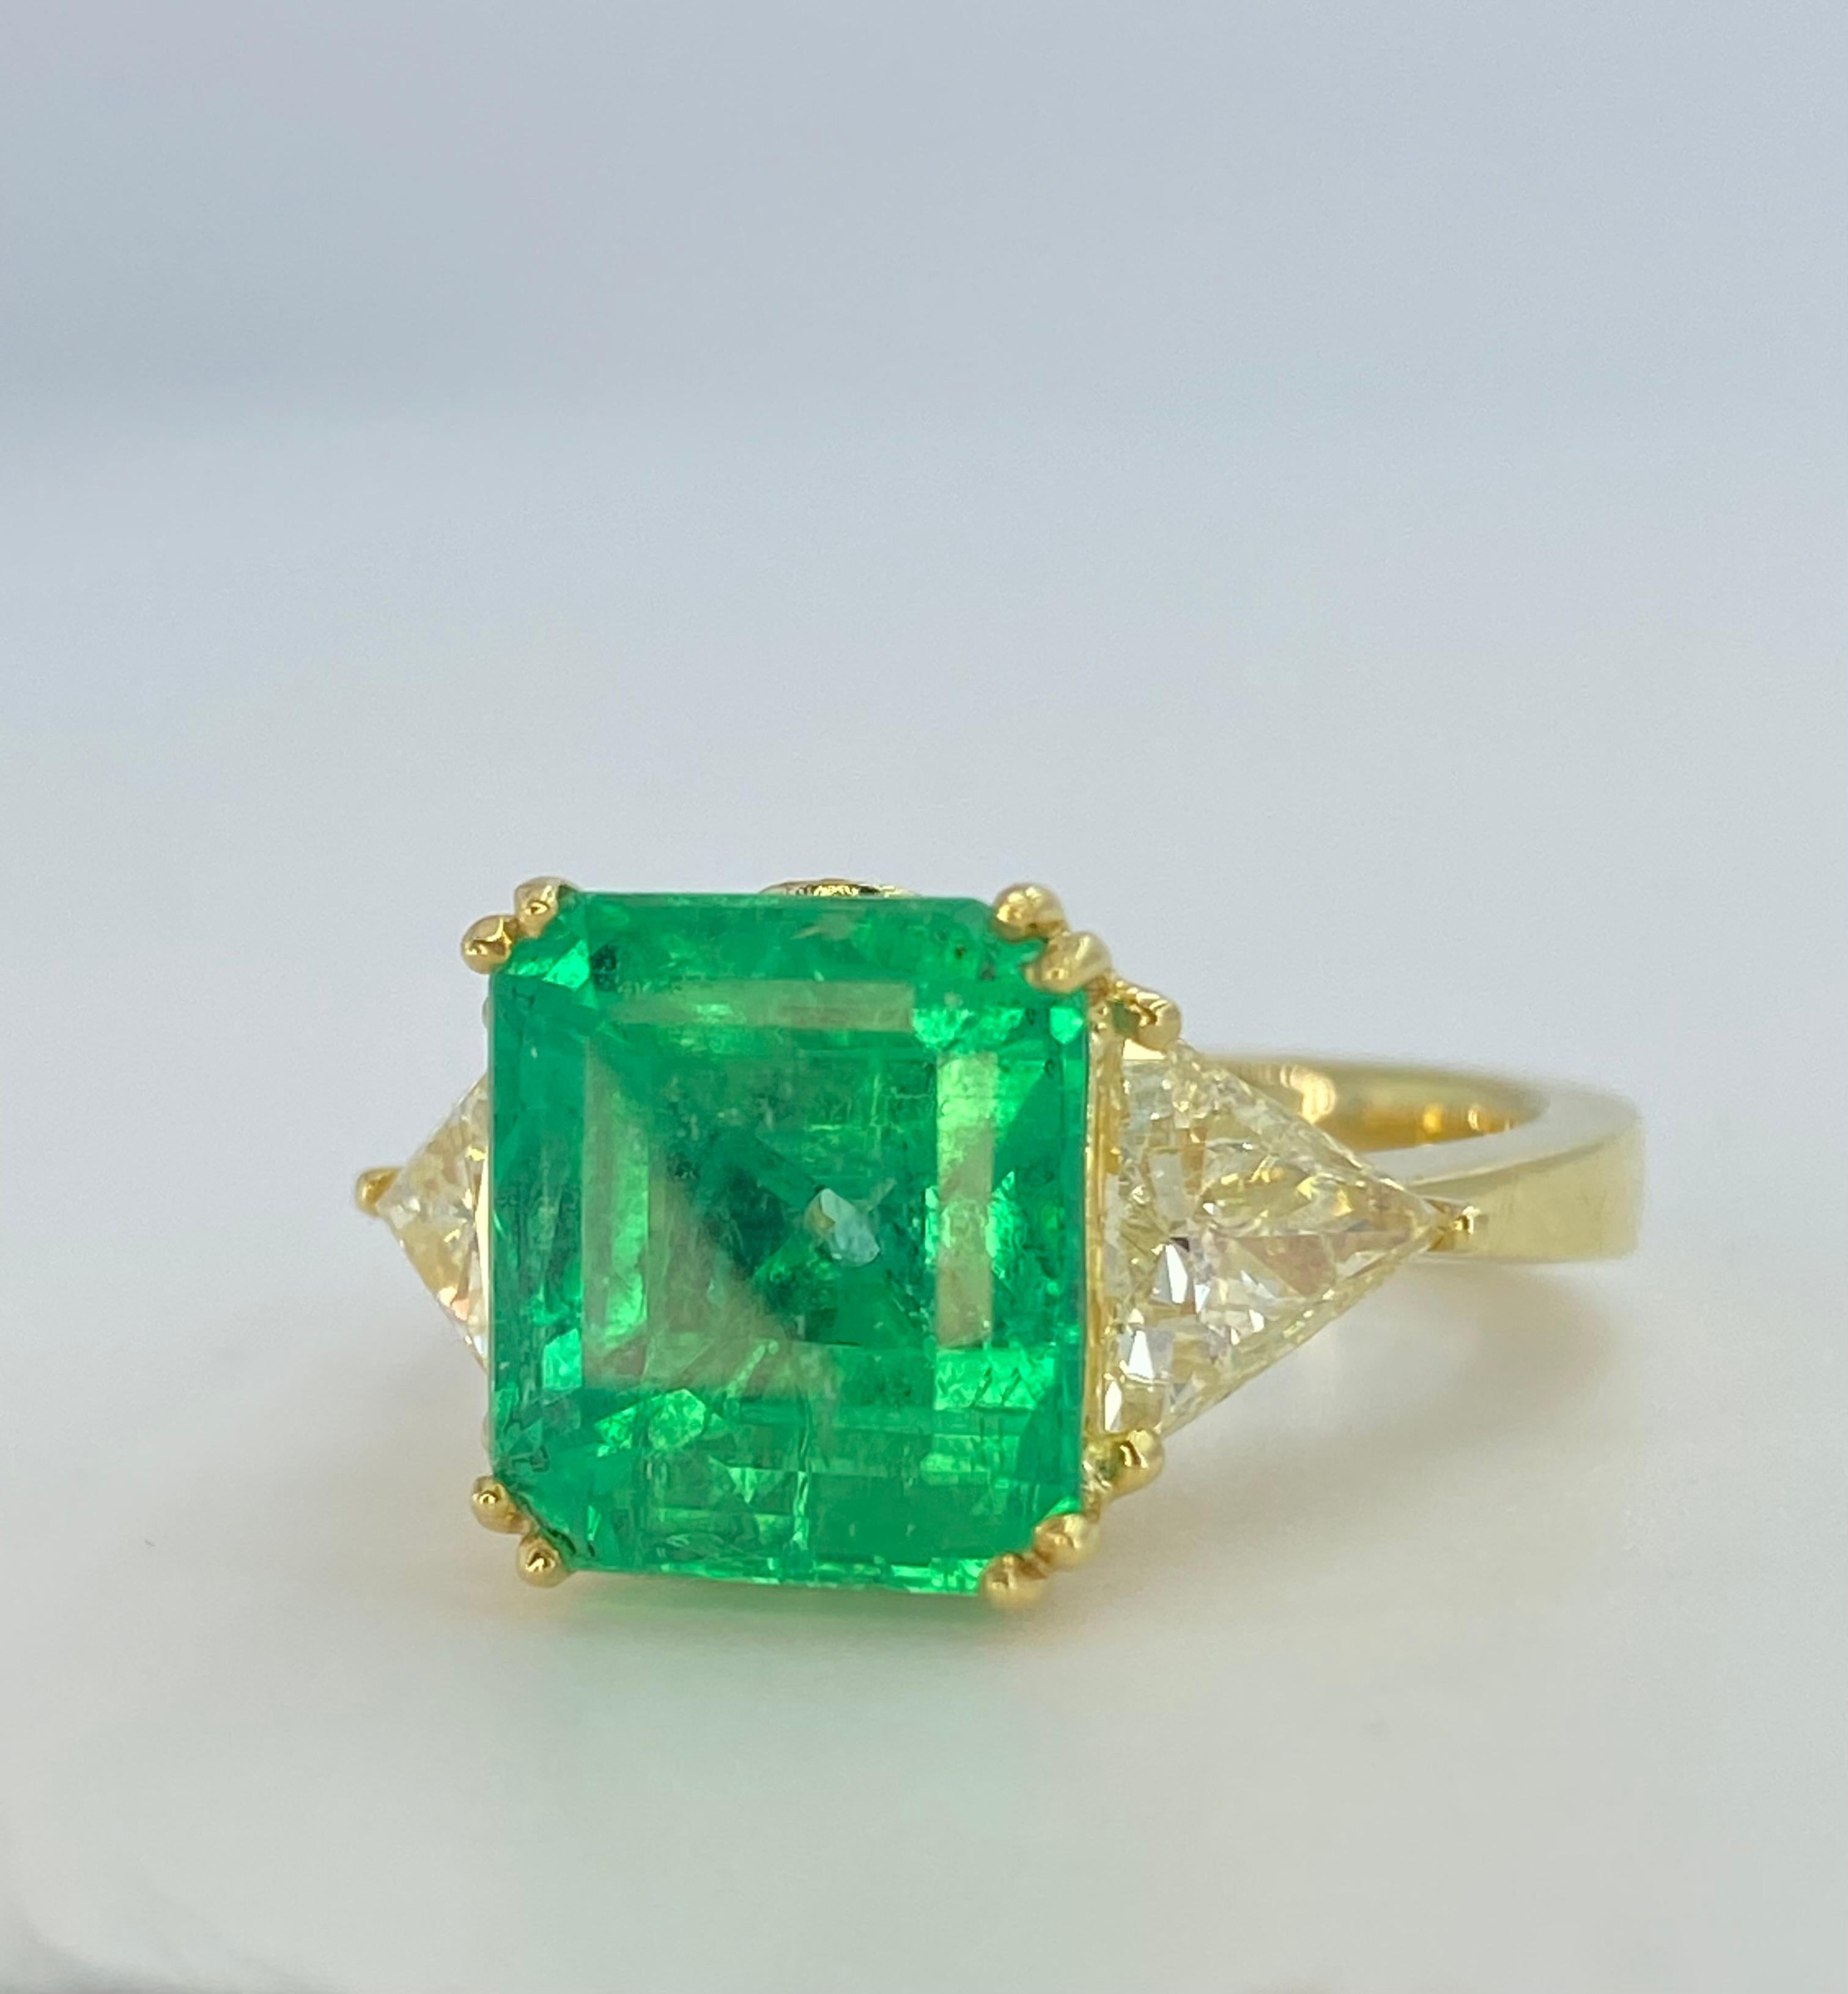 5.67 natural Colombian Emerald mounted in a vintage art deco ring setting. This remarkable Emerald is adorned with 1.15 carats in natural diamond side stones. Beautifully made in an art deco Euro ring shank. 

This Emerald was sourced years ago from